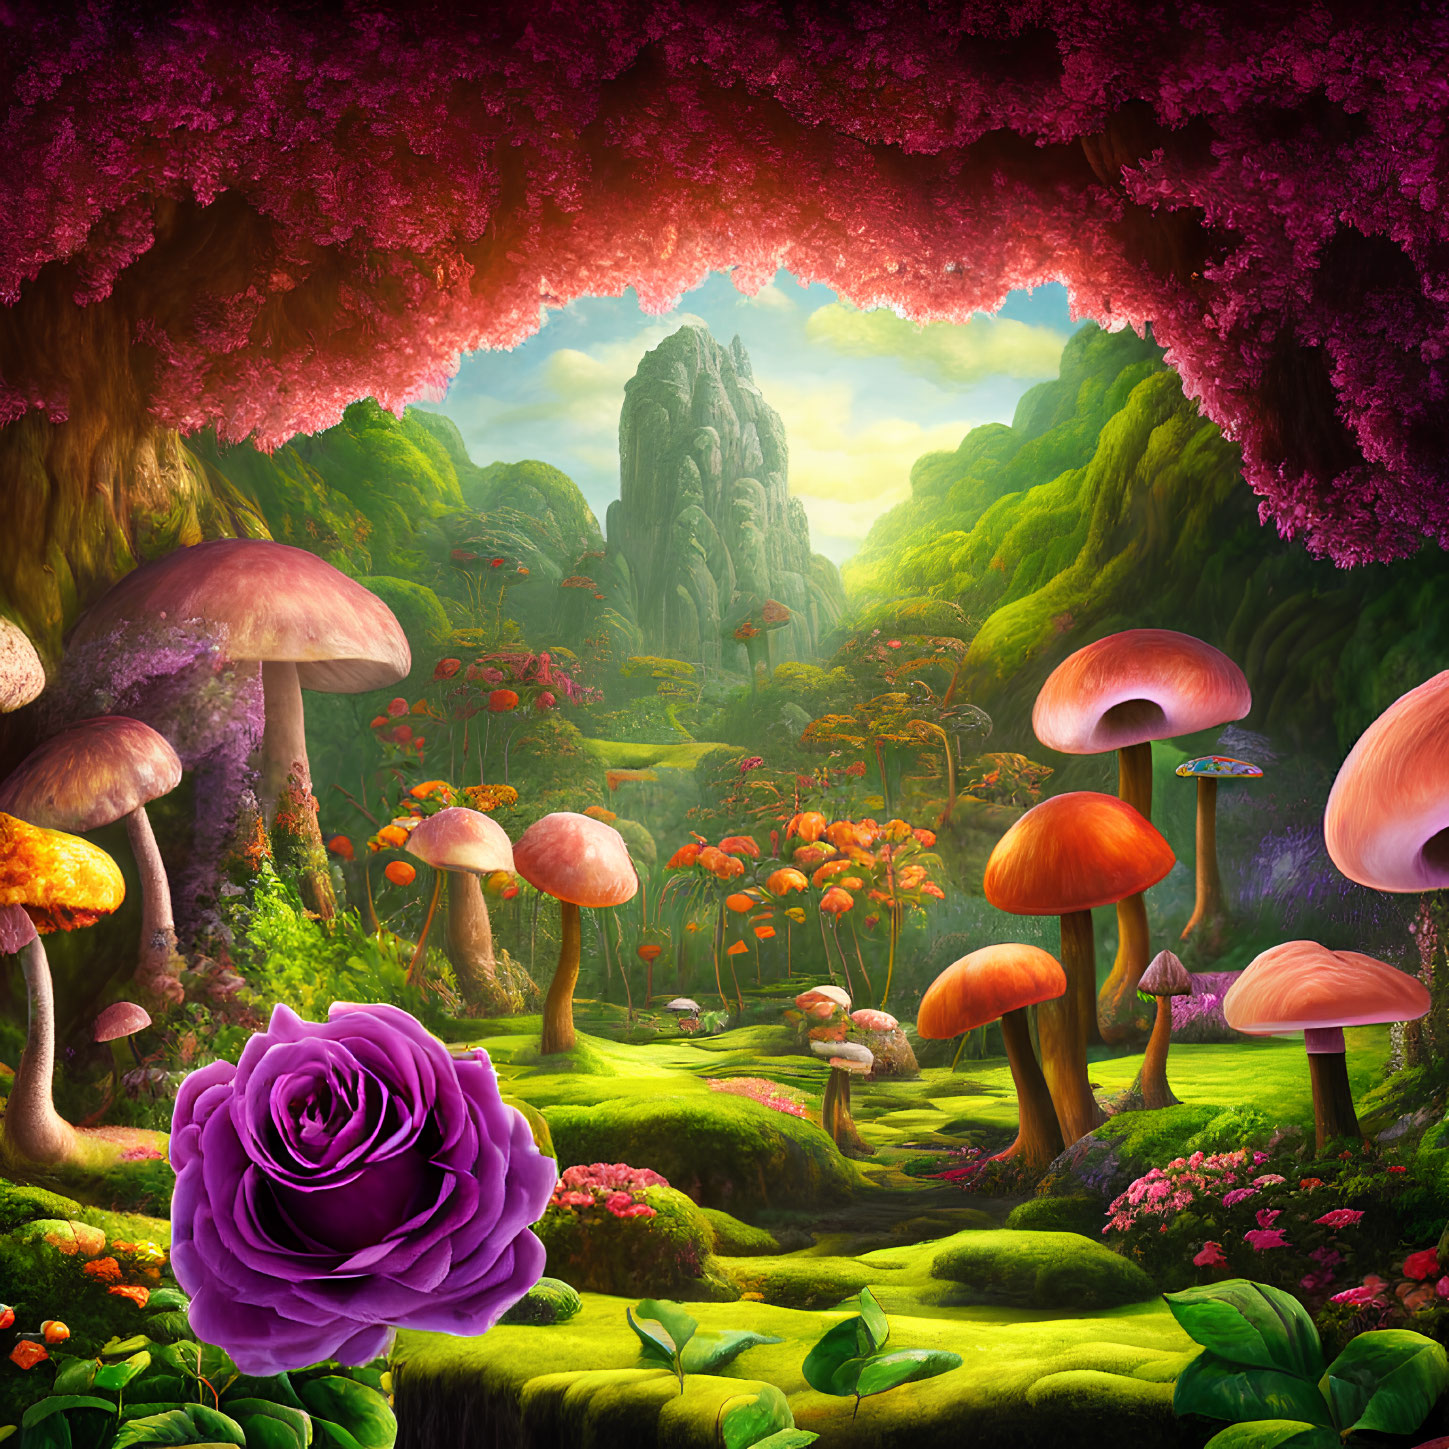 Colorful Fantasy Landscape with Oversized Mushrooms, Purple Rose, Greenery, and Mystical Mountain